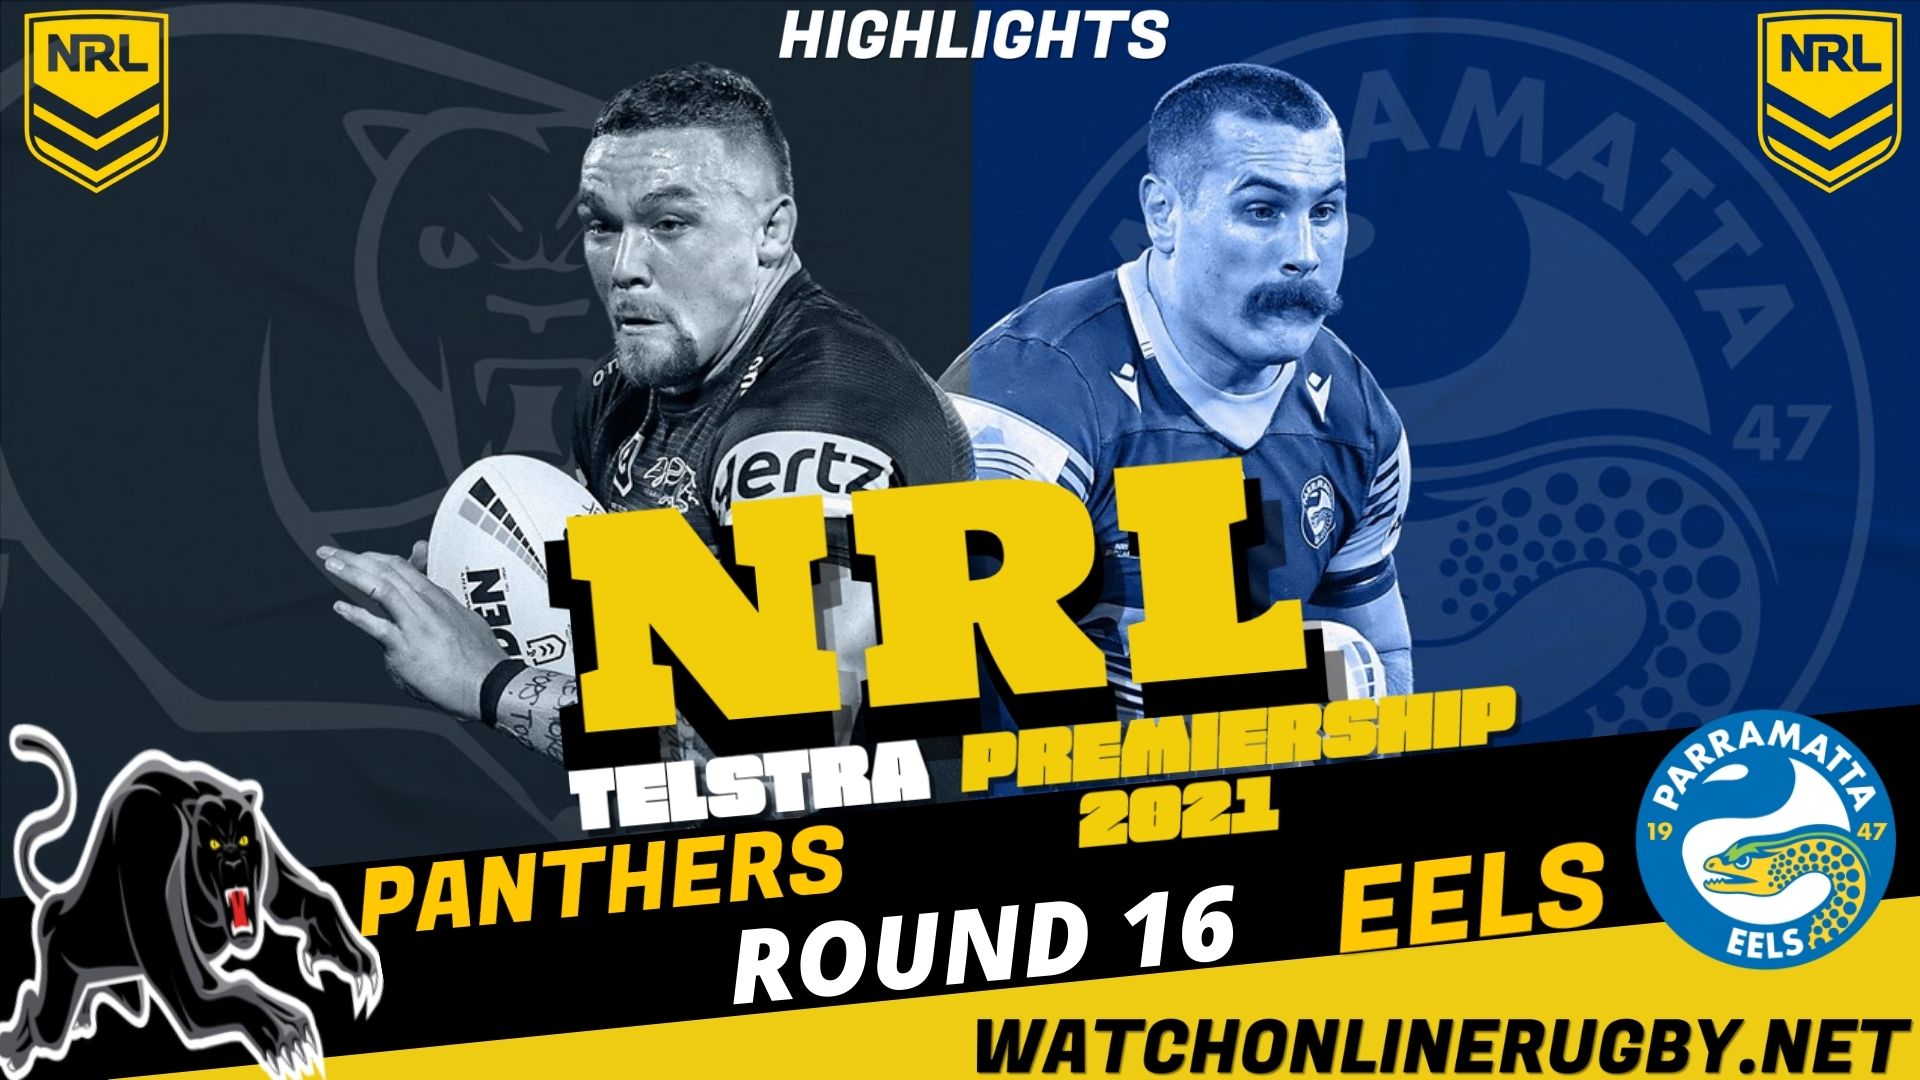 Panthers Vs Eels Highlights RD 16 NRL Rugby